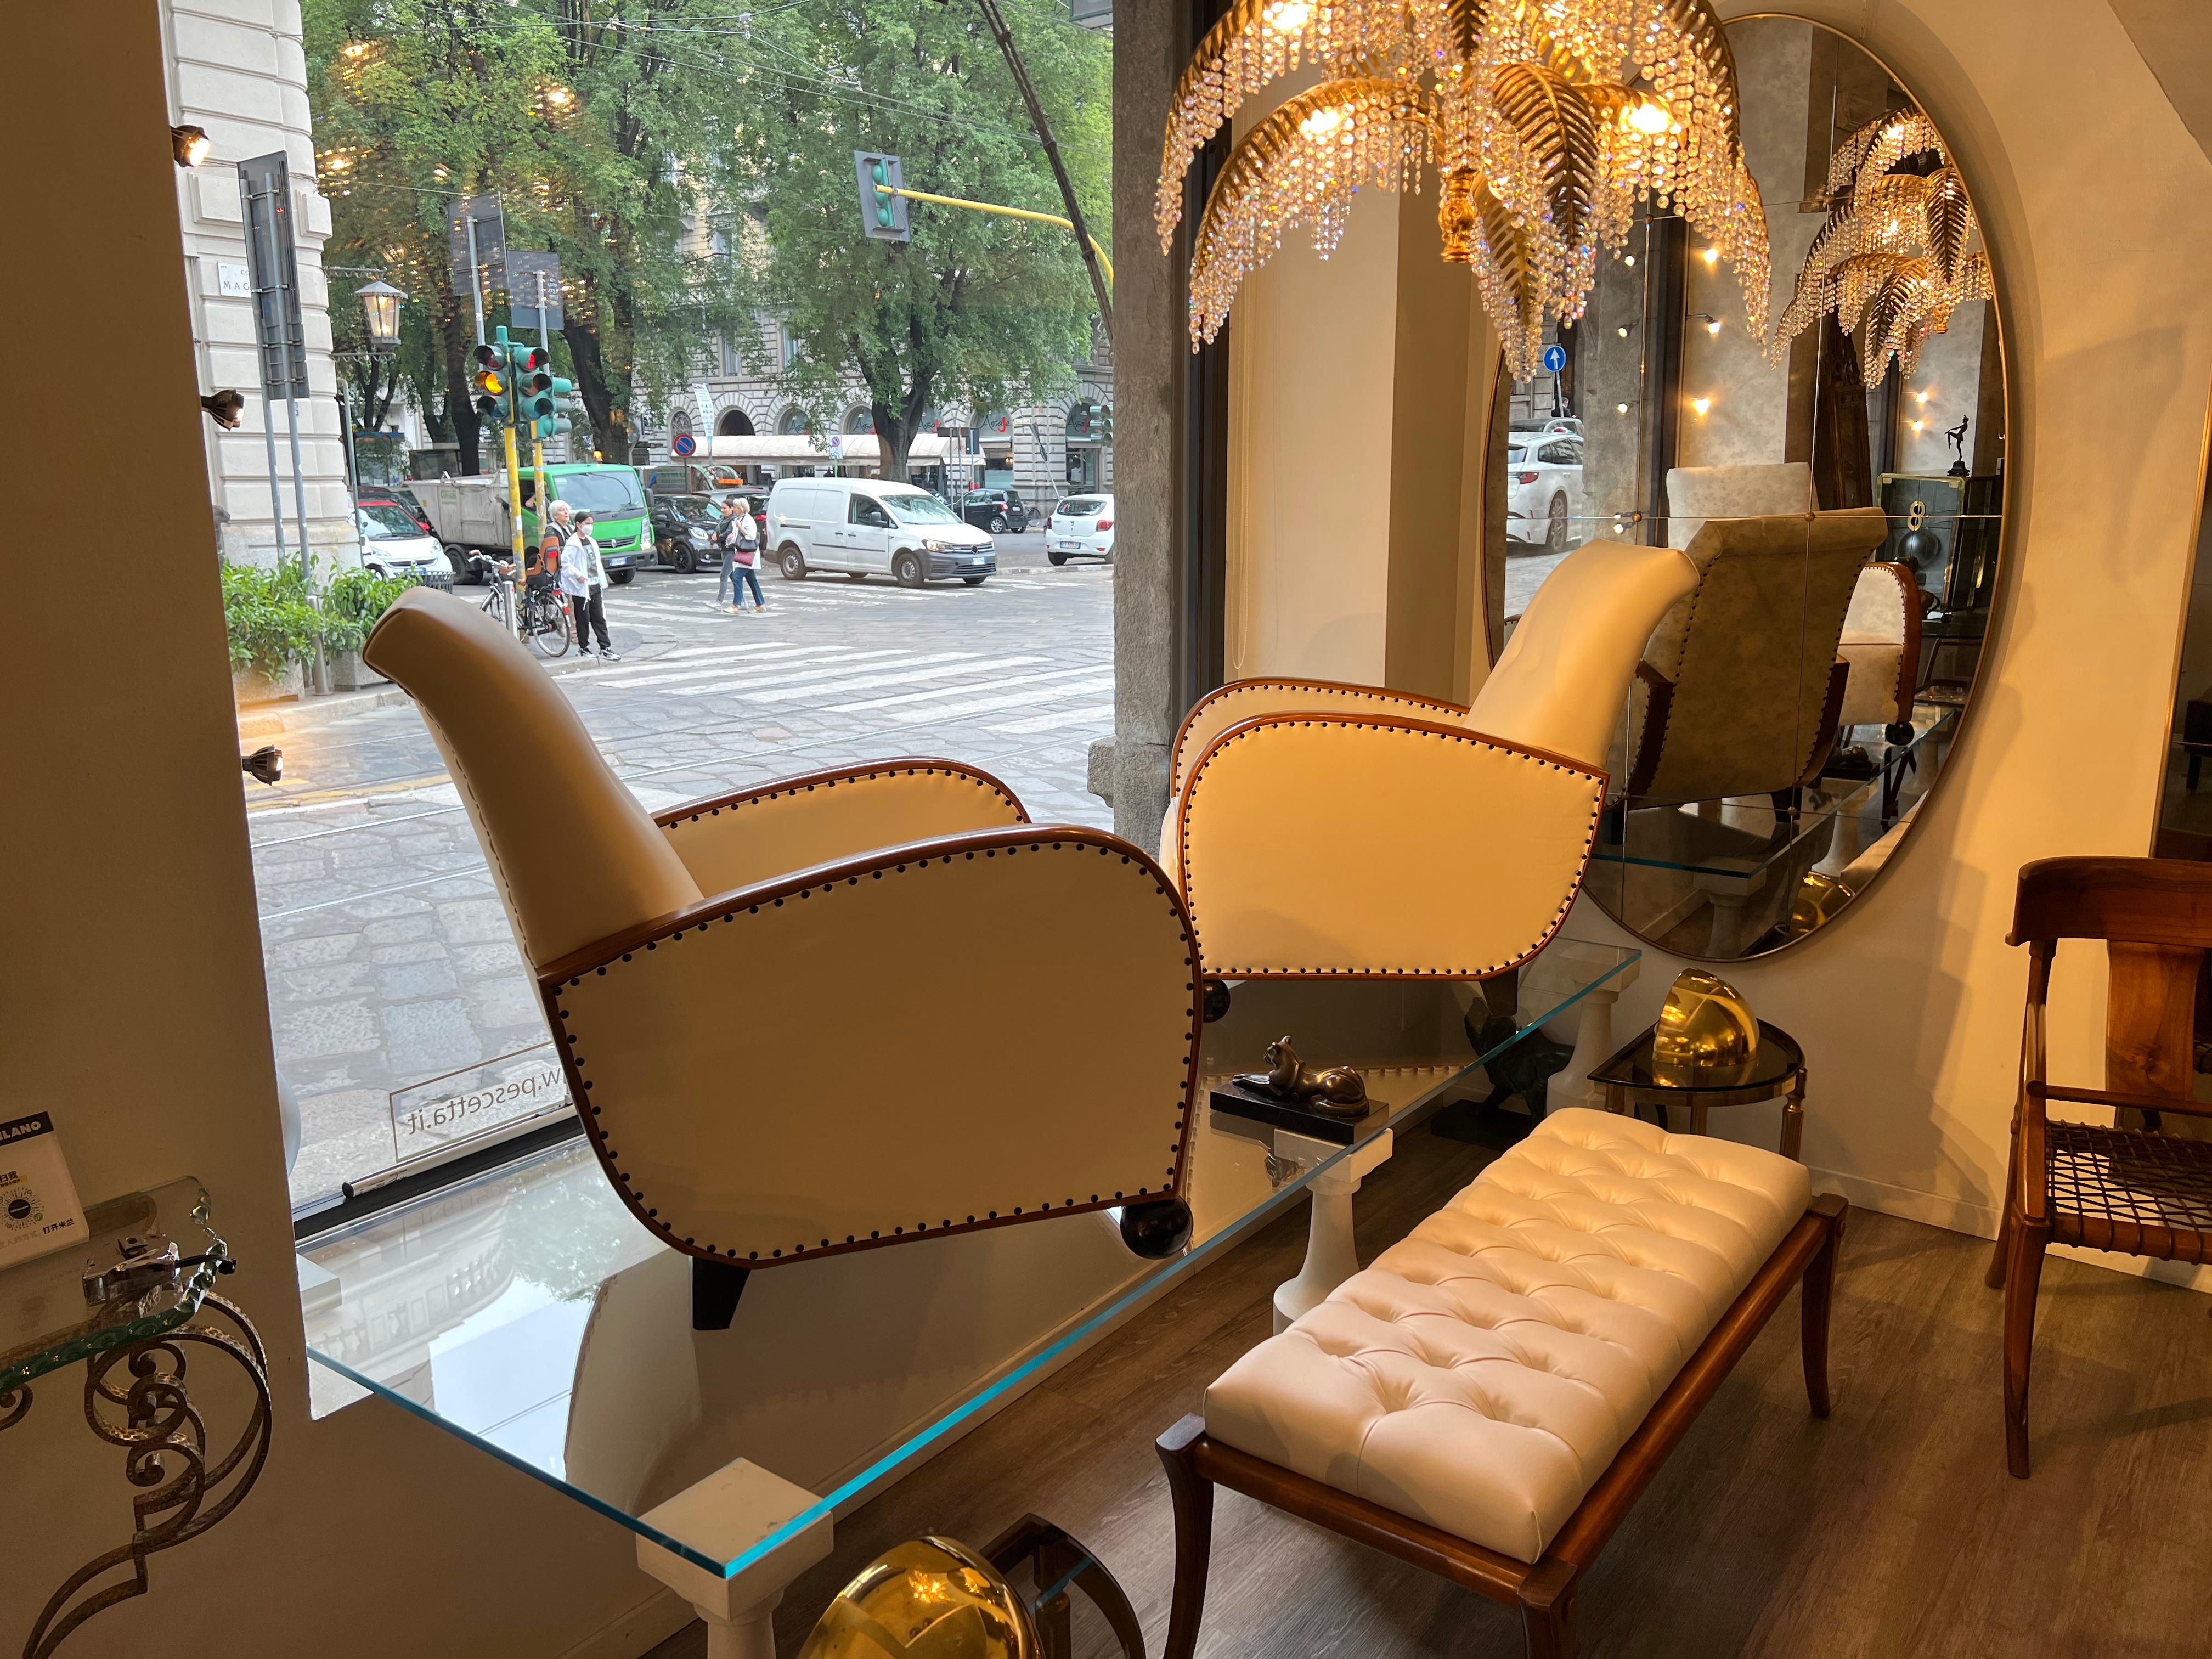 French Art Deco armchairs, form 1930s period. They can be reclined.
Reupholstered in light cream color.
Restored in wooden parts in conservative way.
Size: W 66 cm, D 75-90 cm, h 85 cm, seat h 36 cm.
Better pictures and video to come.